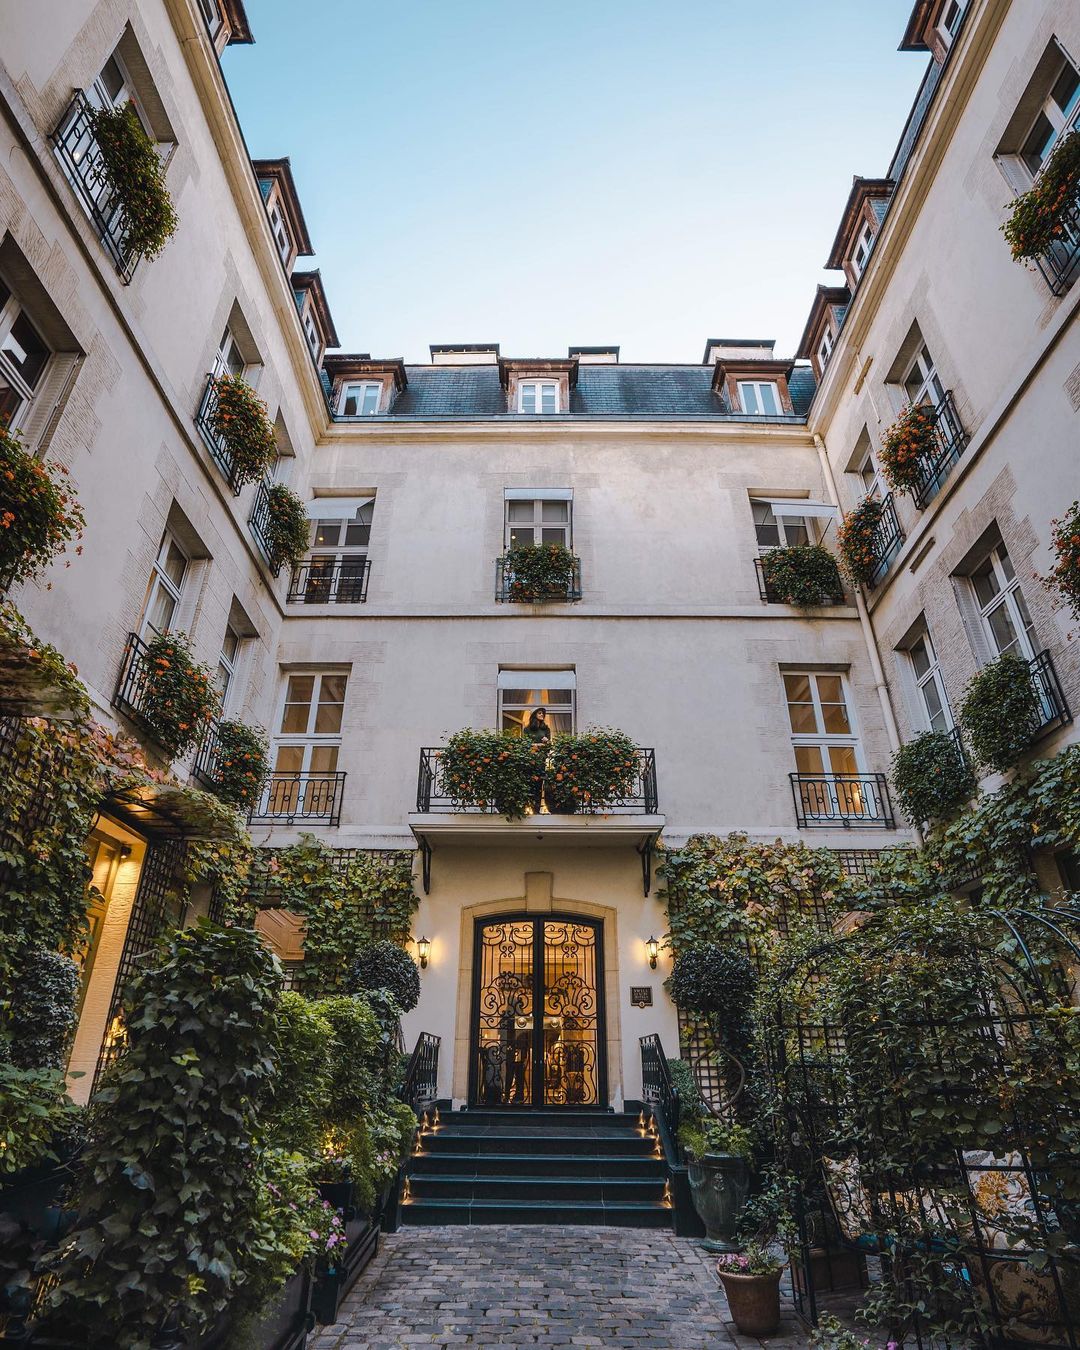 The ivy-covered courtyard entrance of Relais Christine in Paris